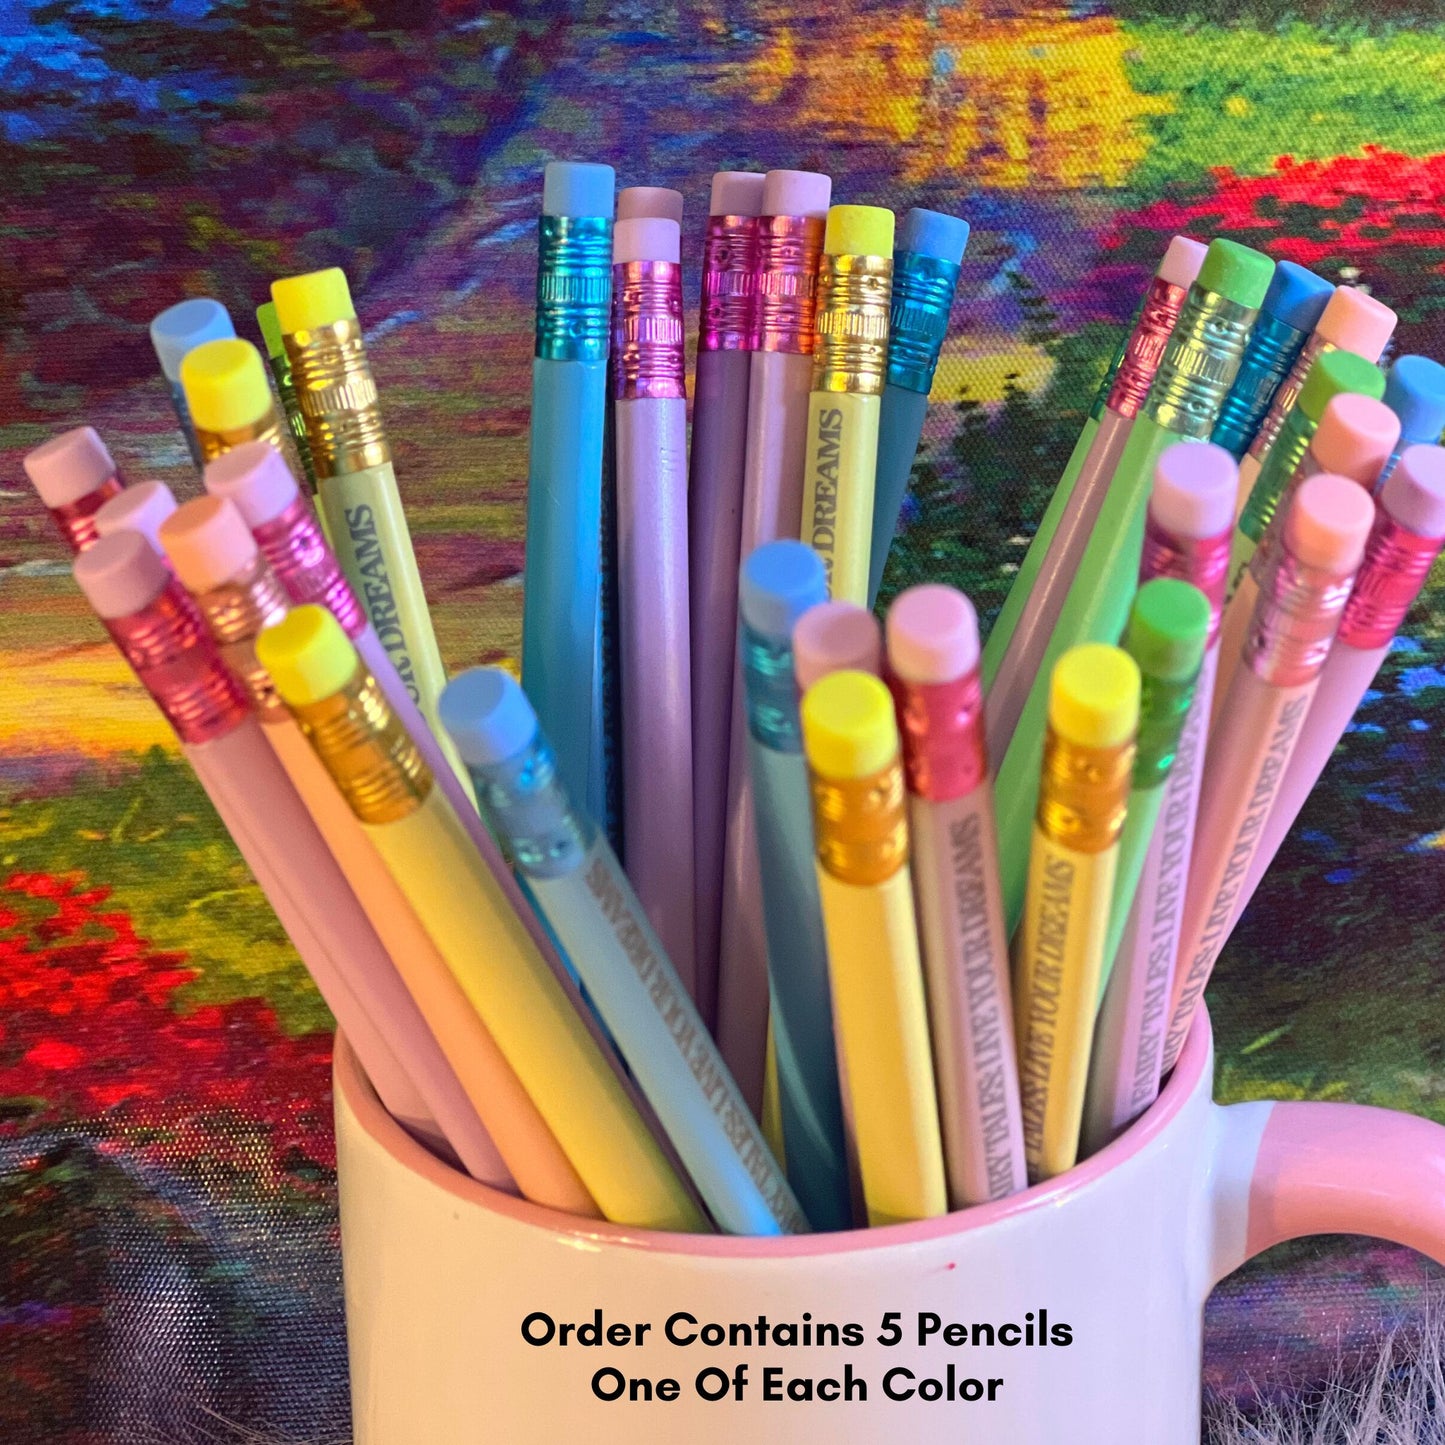 Dreamy Pastel Pencil Collection Of 5 From Big Fairy Tales By Schatar